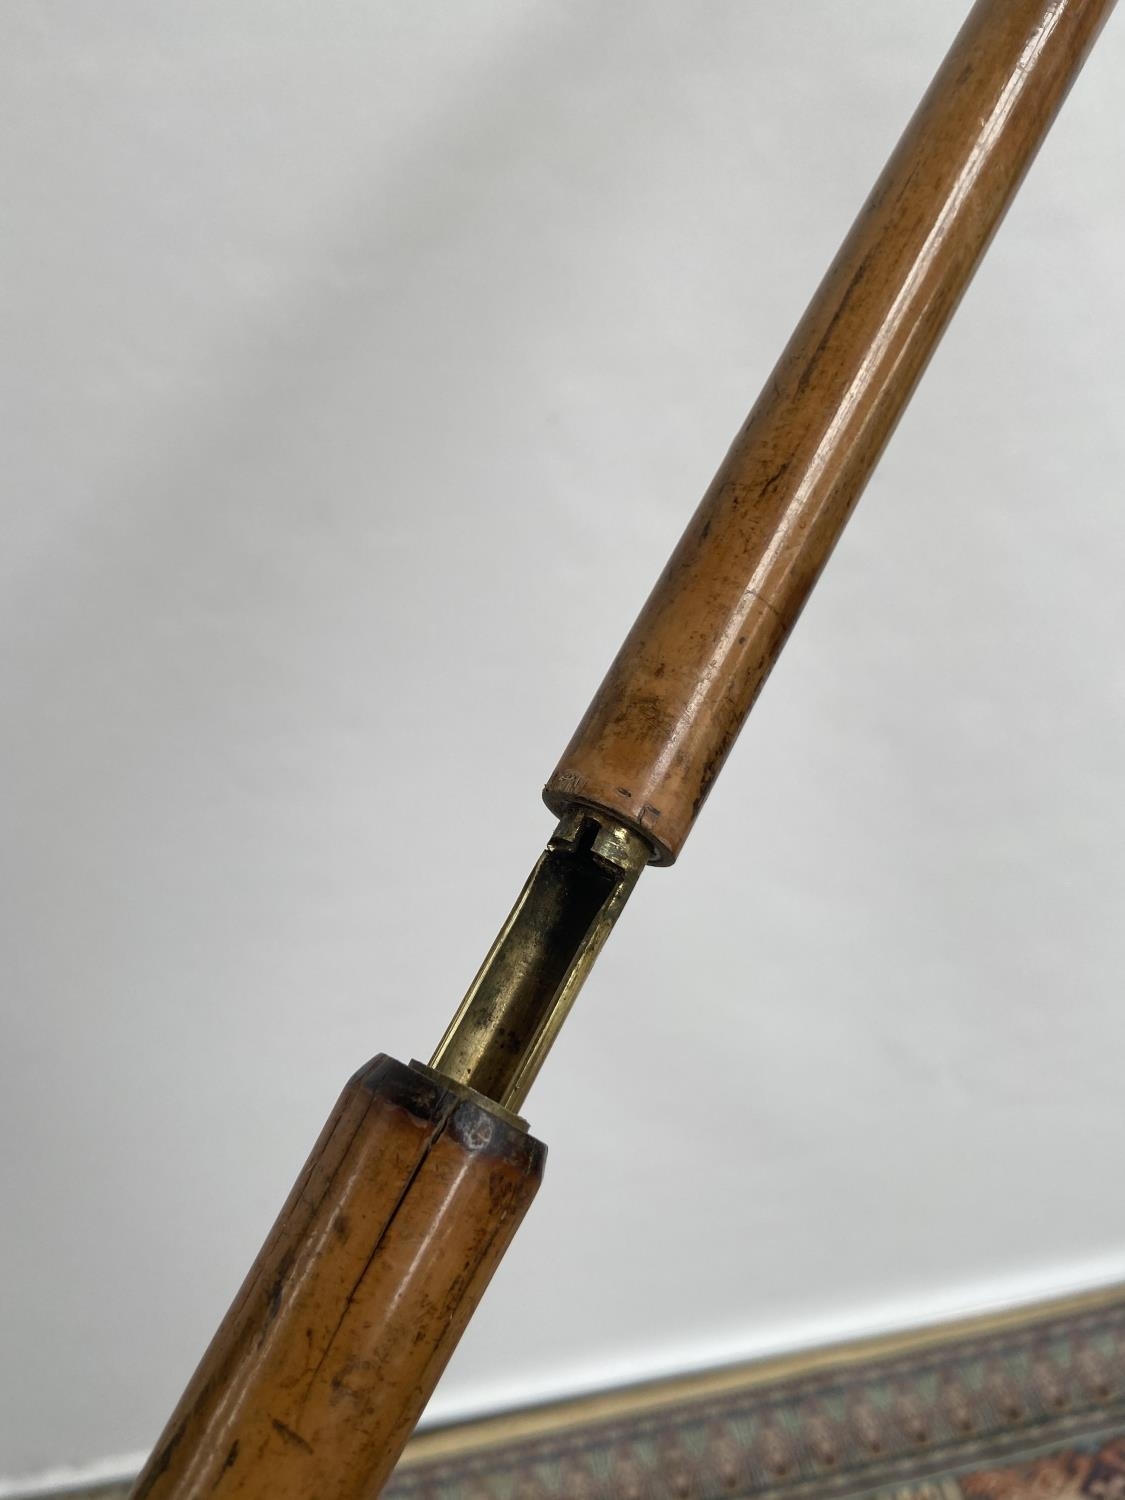 An antique walking cane pistol, designed with a bone handle and bamboo shaft [length, 90cm] - Image 3 of 5